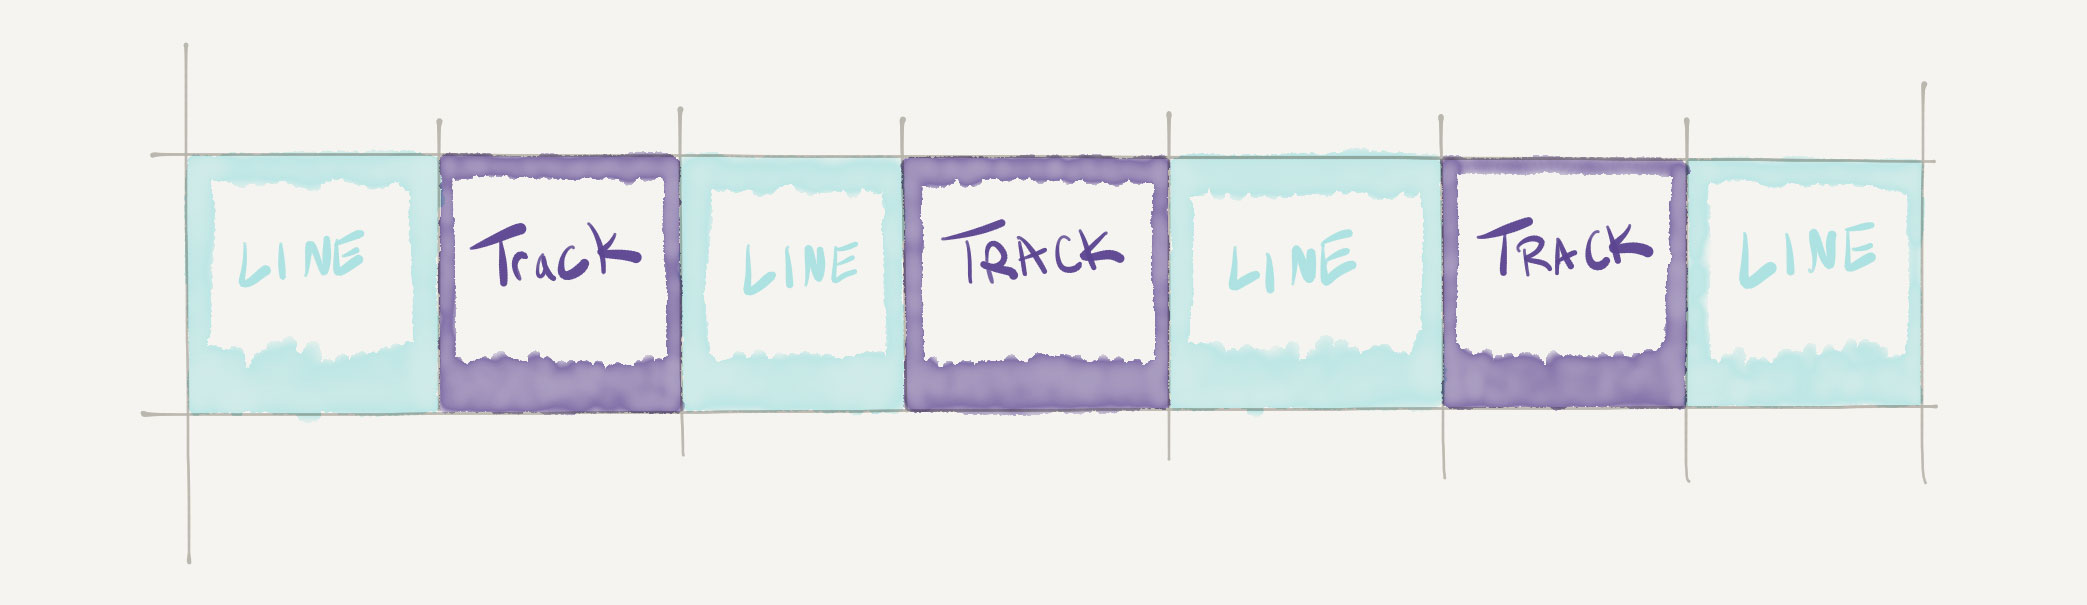 css grid line syntax